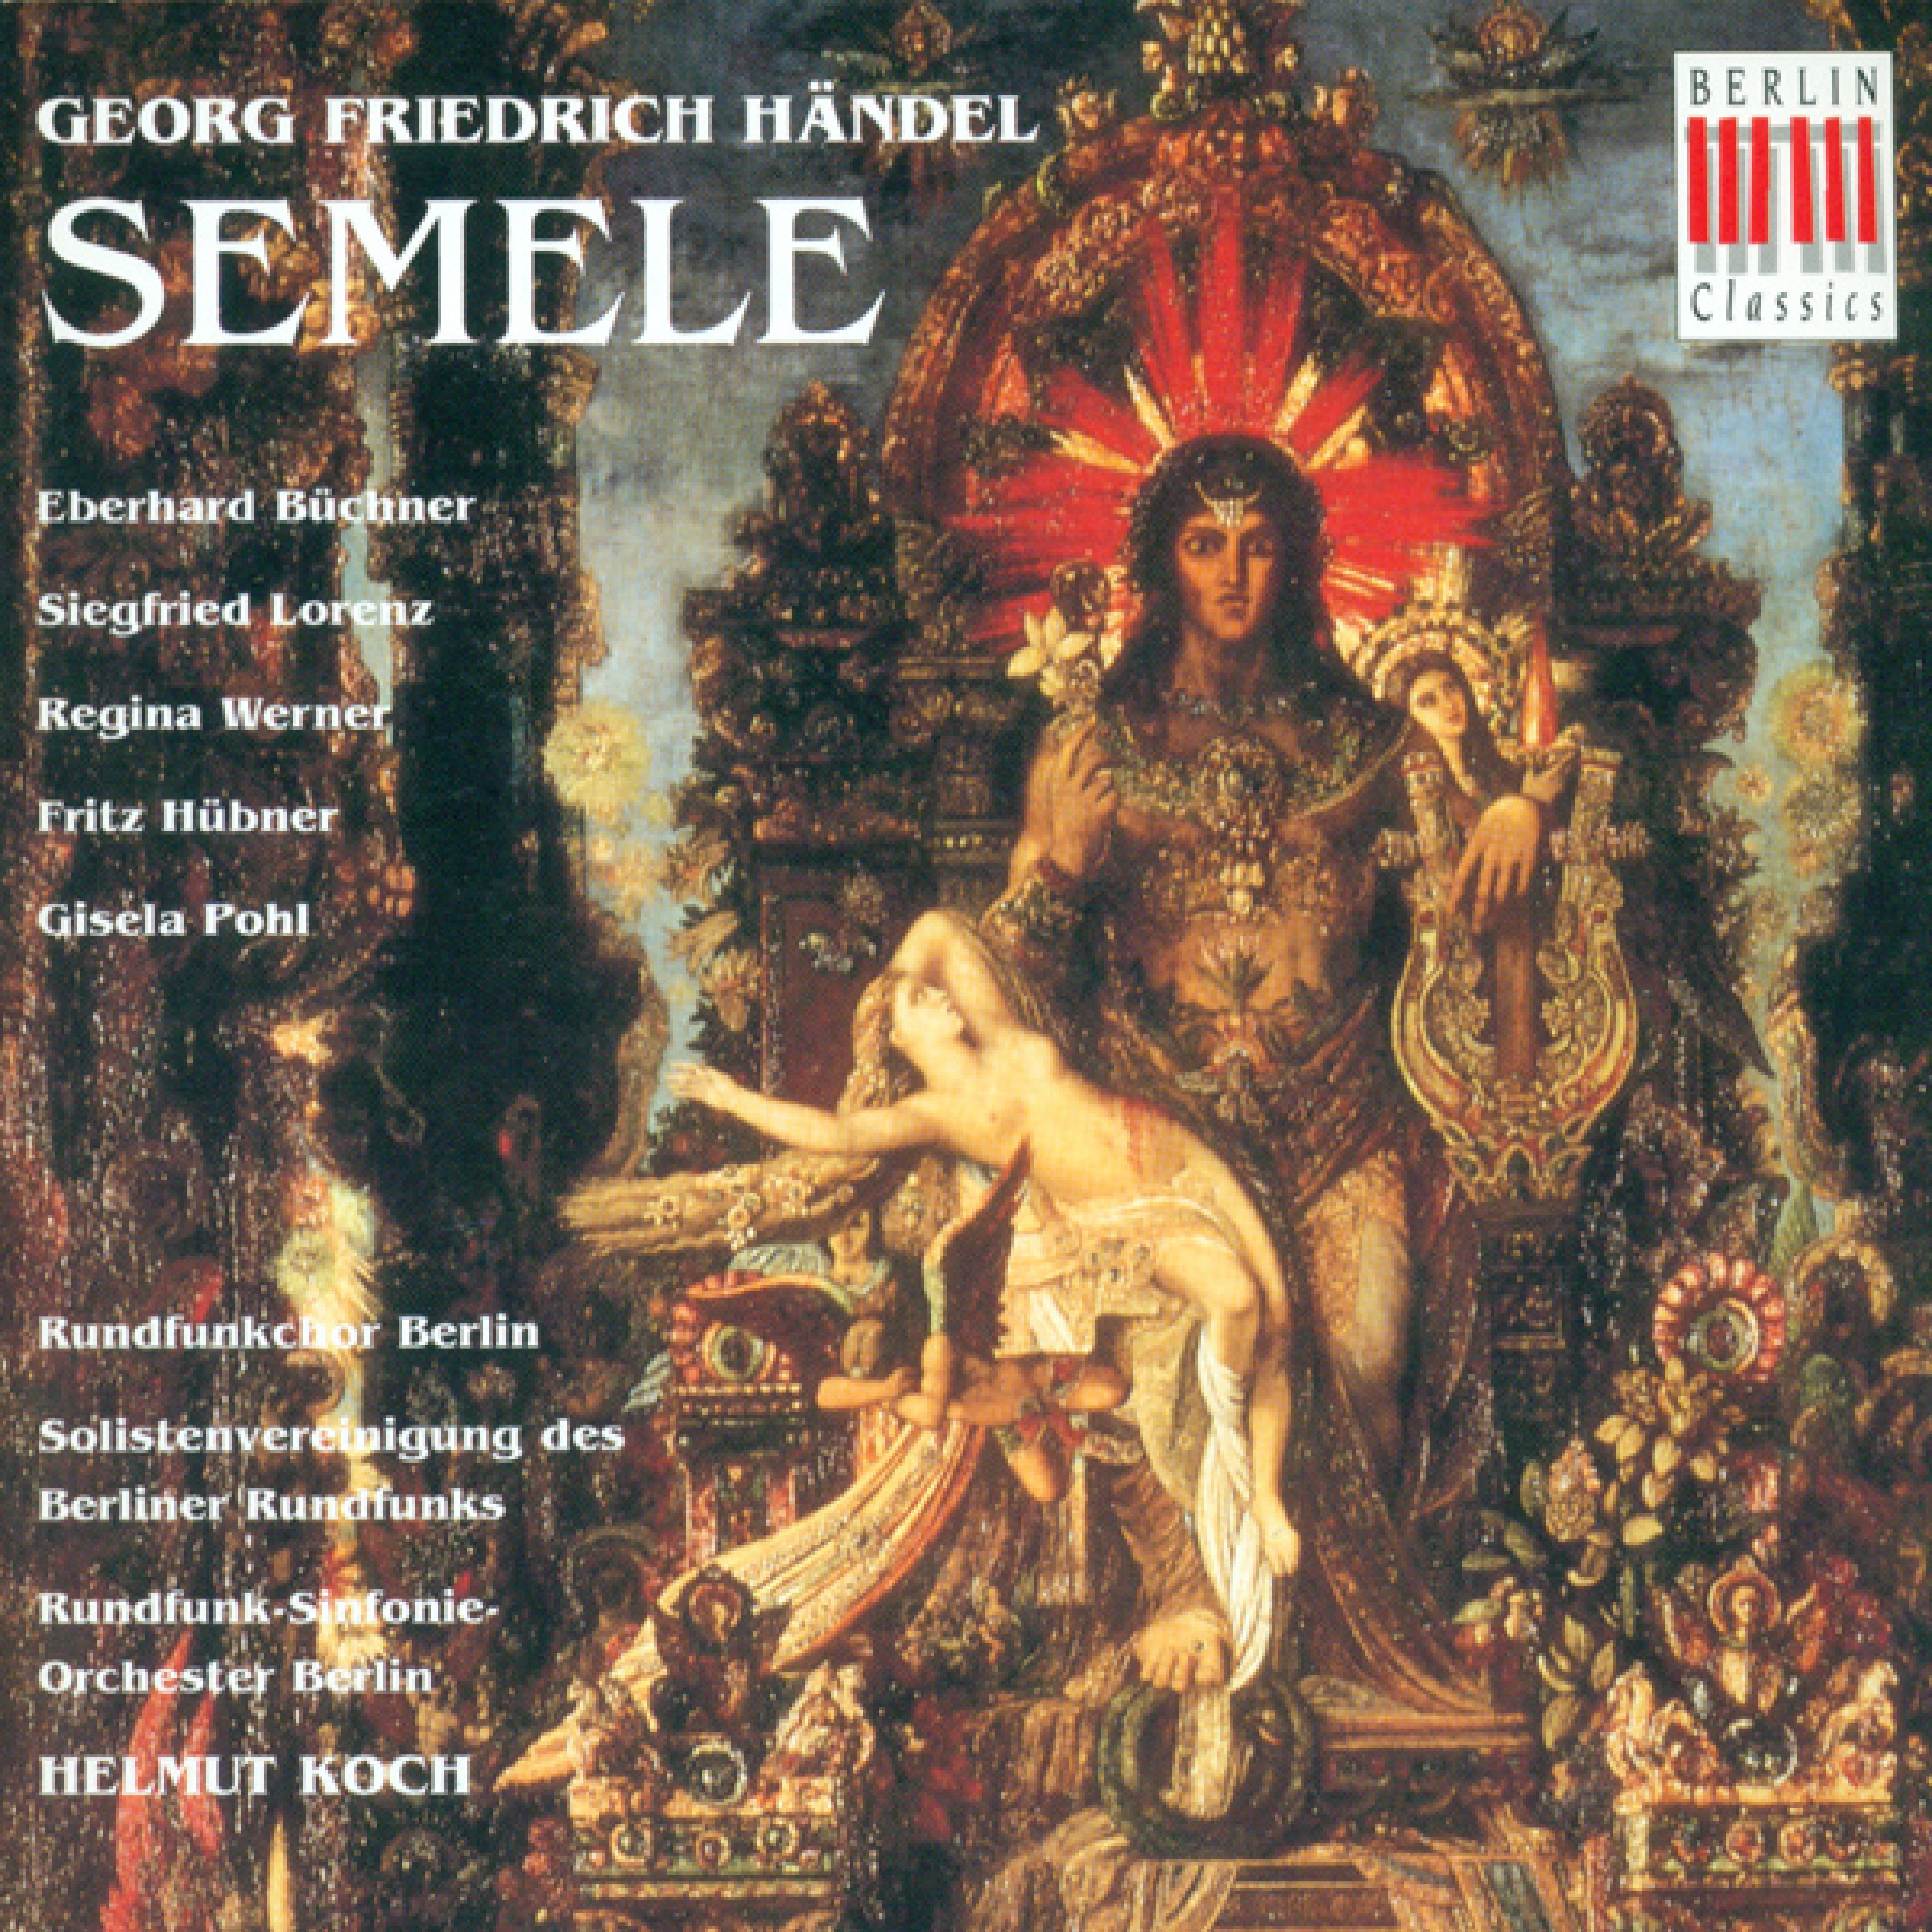 Semele, HWV 58: Act II - "You are mortal and require time to rest"